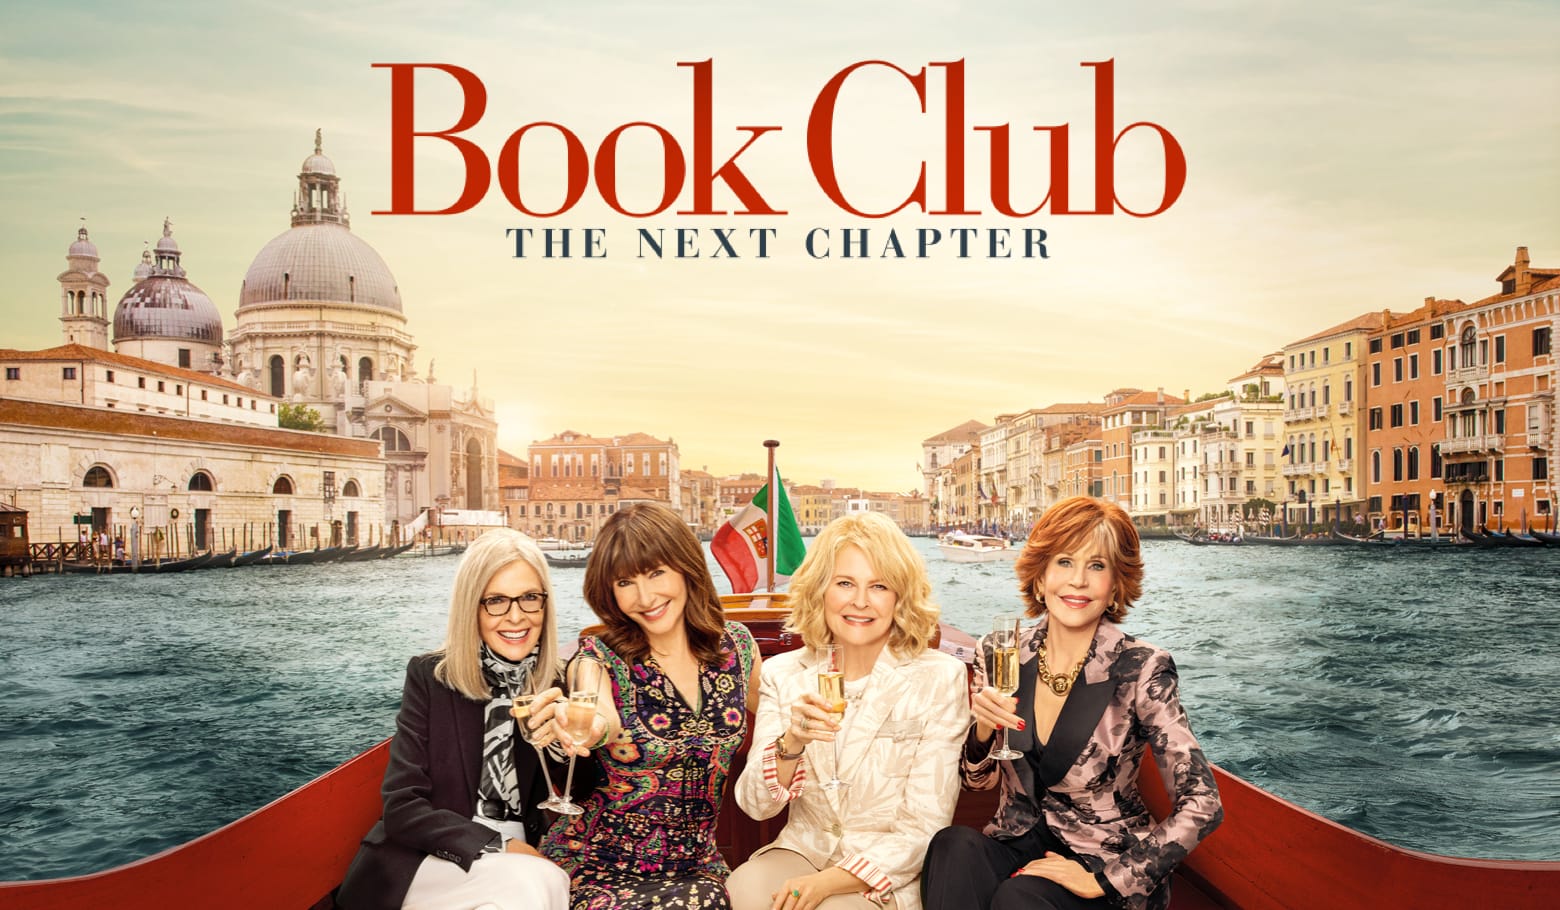 See A Special Screening of “BOOK CLUB: THE NEXT CHAPTER”